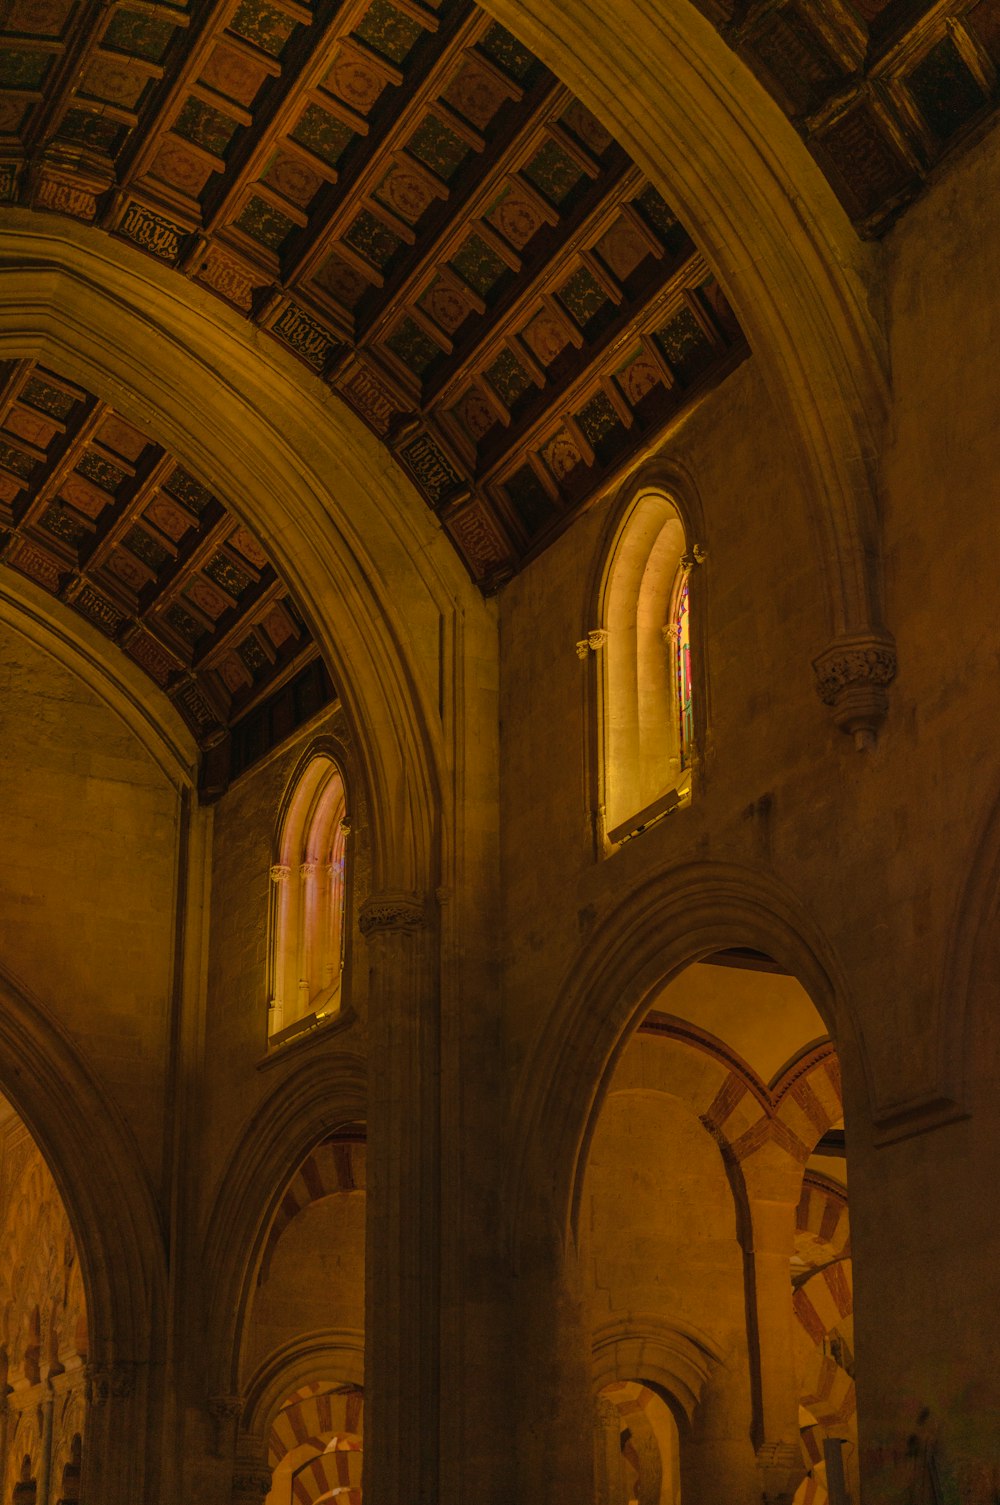 a large cathedral with vaulted ceilings and stained glass windows